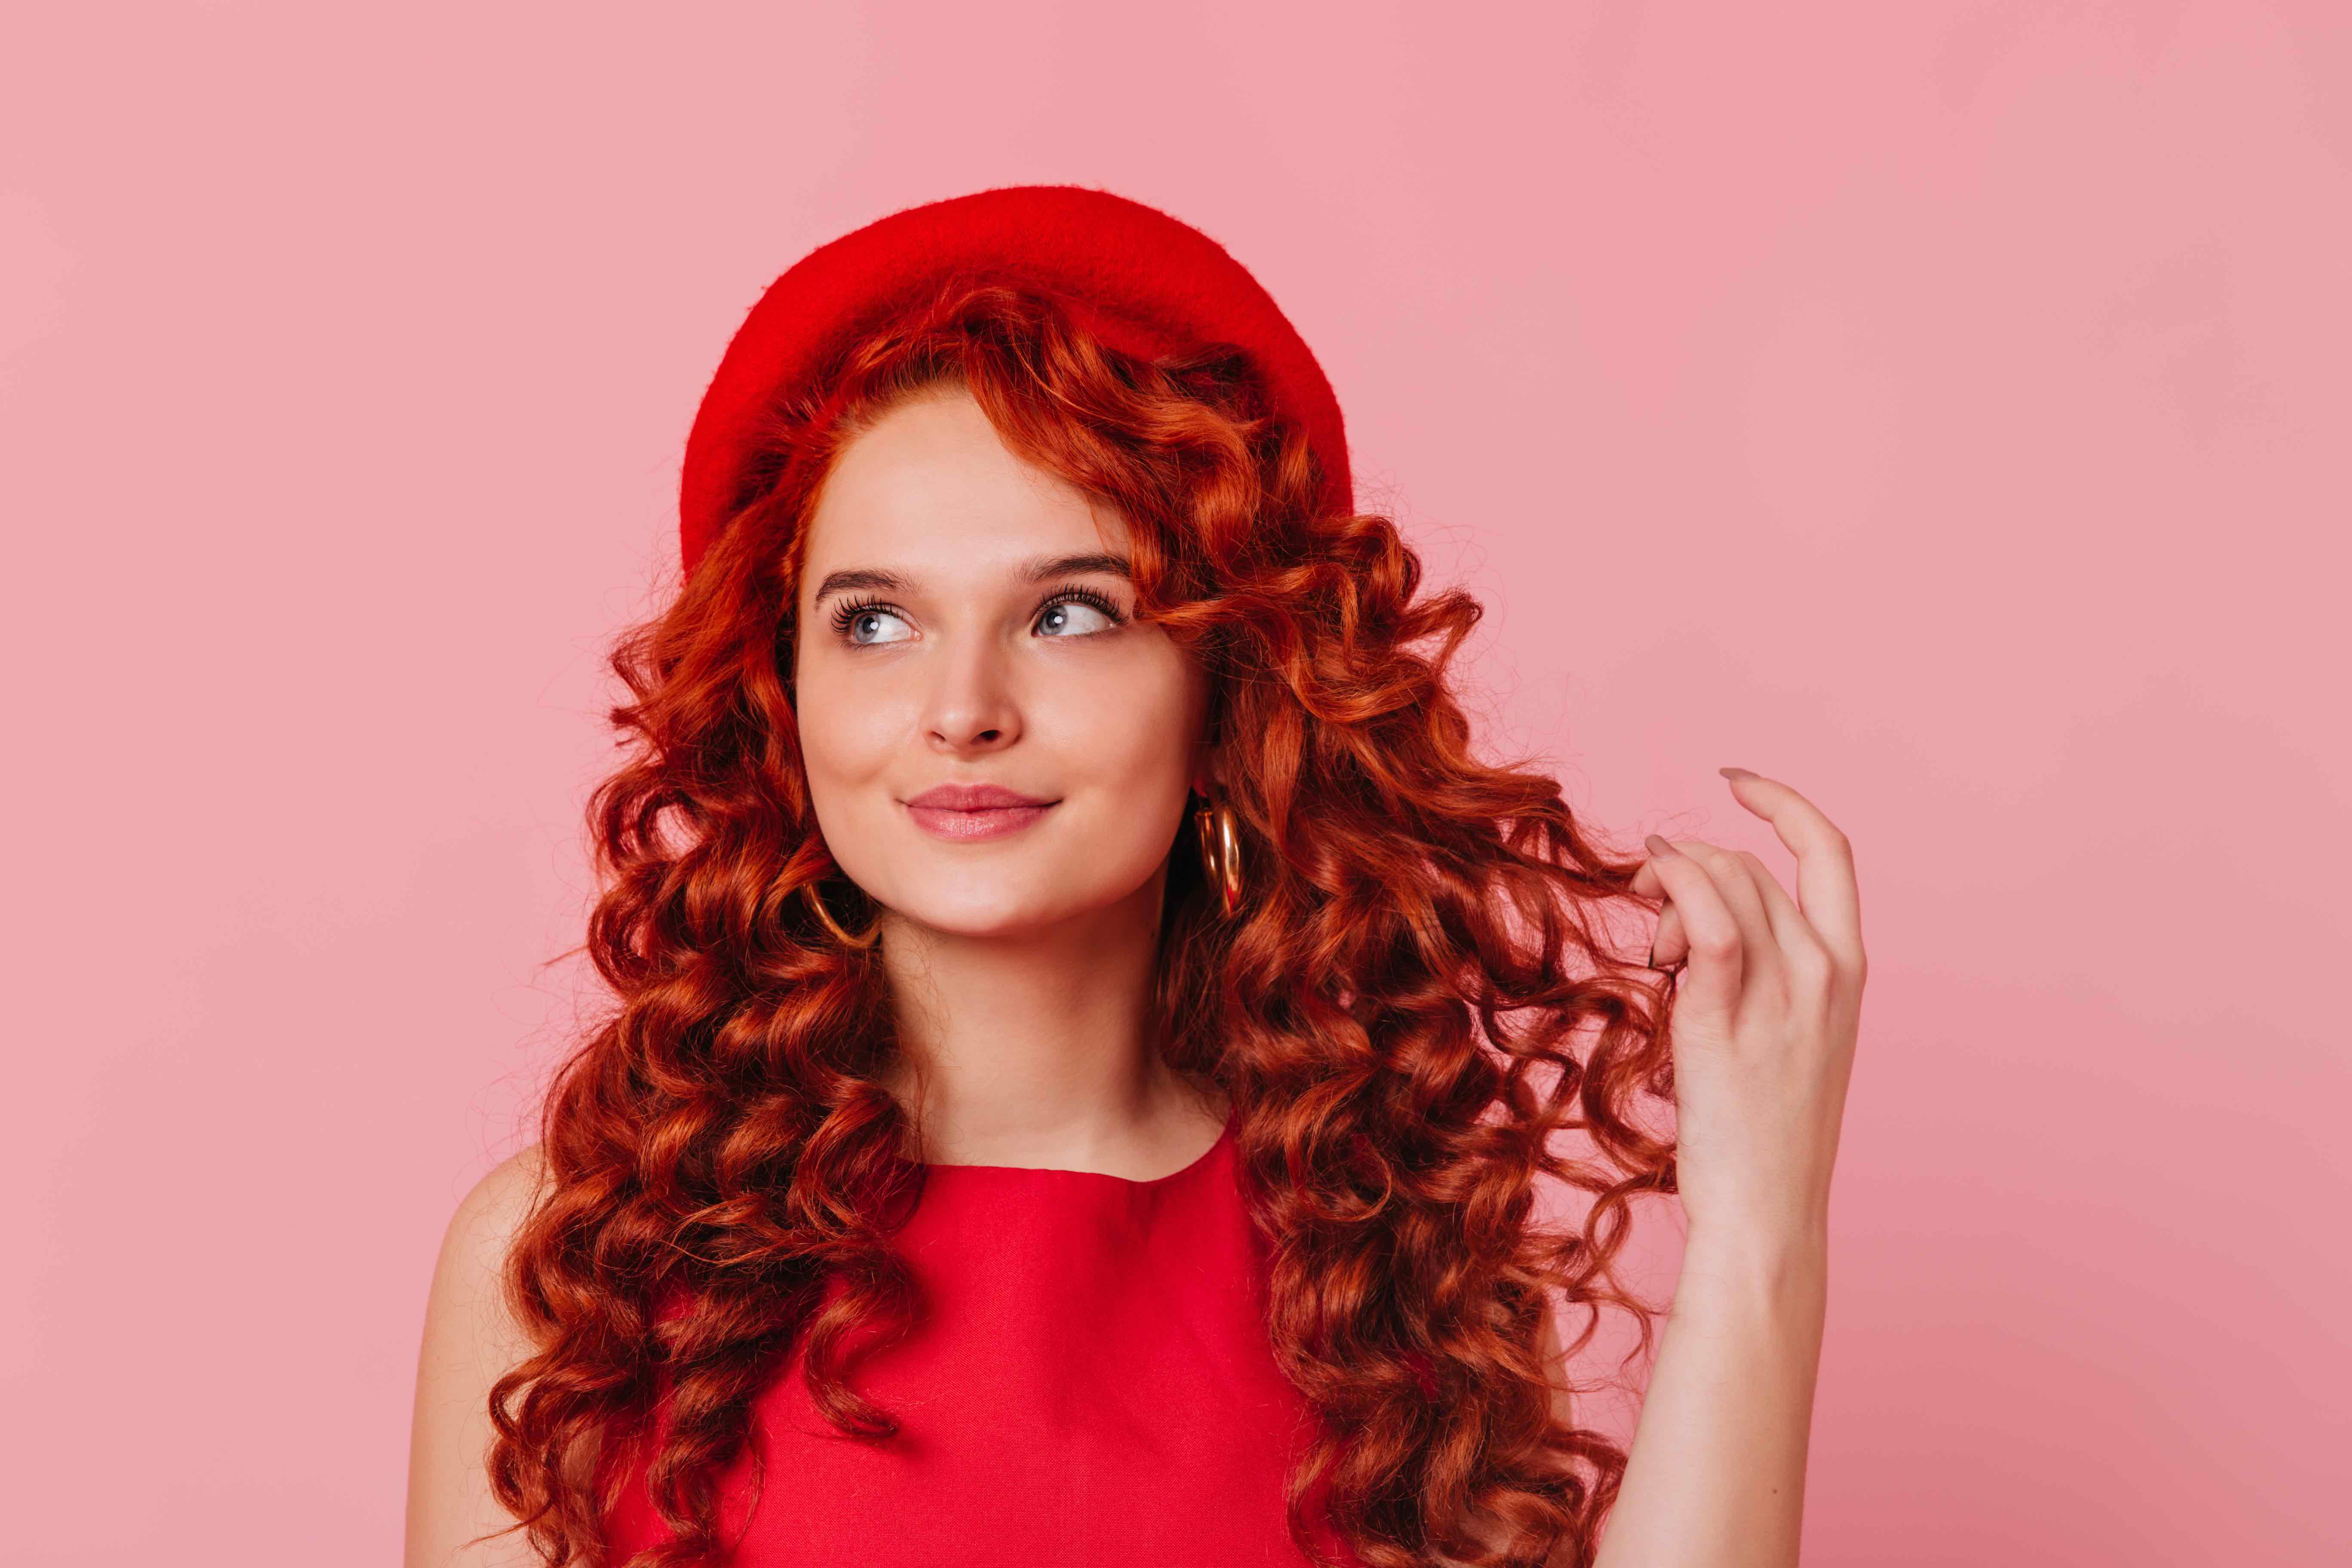 Close-up portrait of young stylish woman in red beret and top. Blue-eyed girl dreamily touches her red curls on pink background. Close-up portrait of young stylish woman in red beret and top. Blue-eyed girl dreamily touches her red curls on pink background